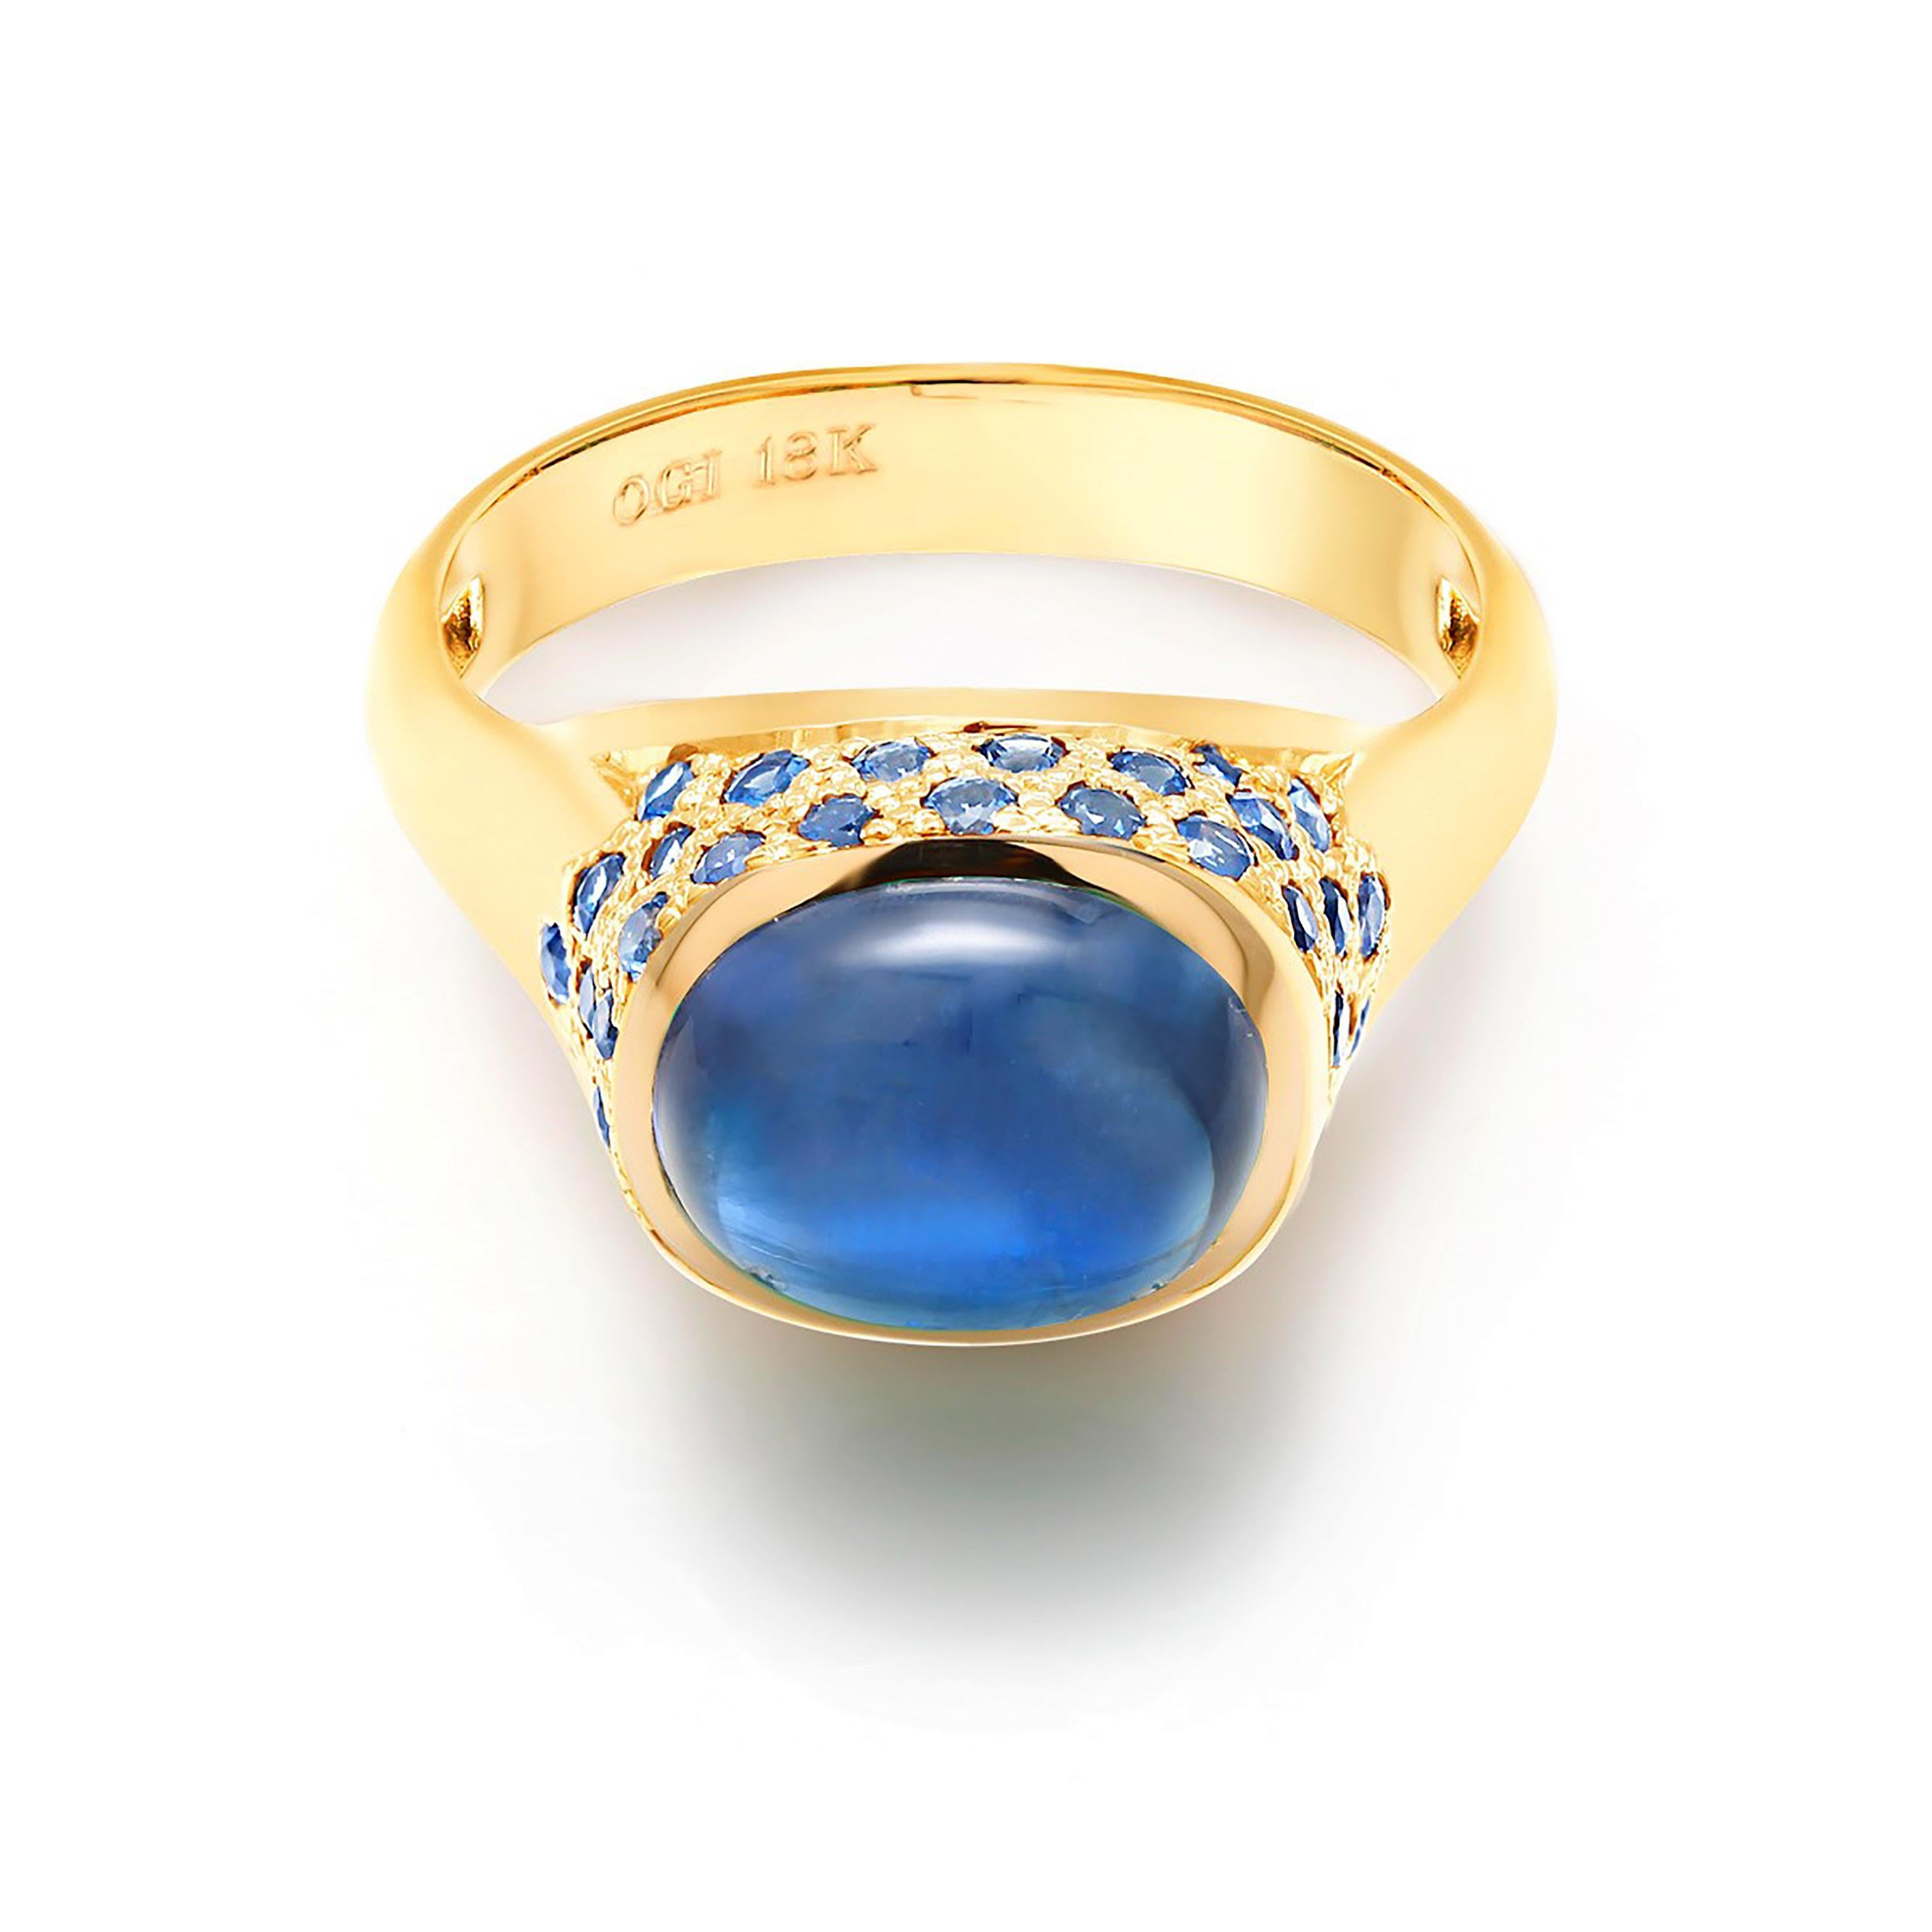 Oval Cut Ceylon Cabochon Sapphire Dome Yellow Gold Cocktail Ring Weighing 3.09 Carat 